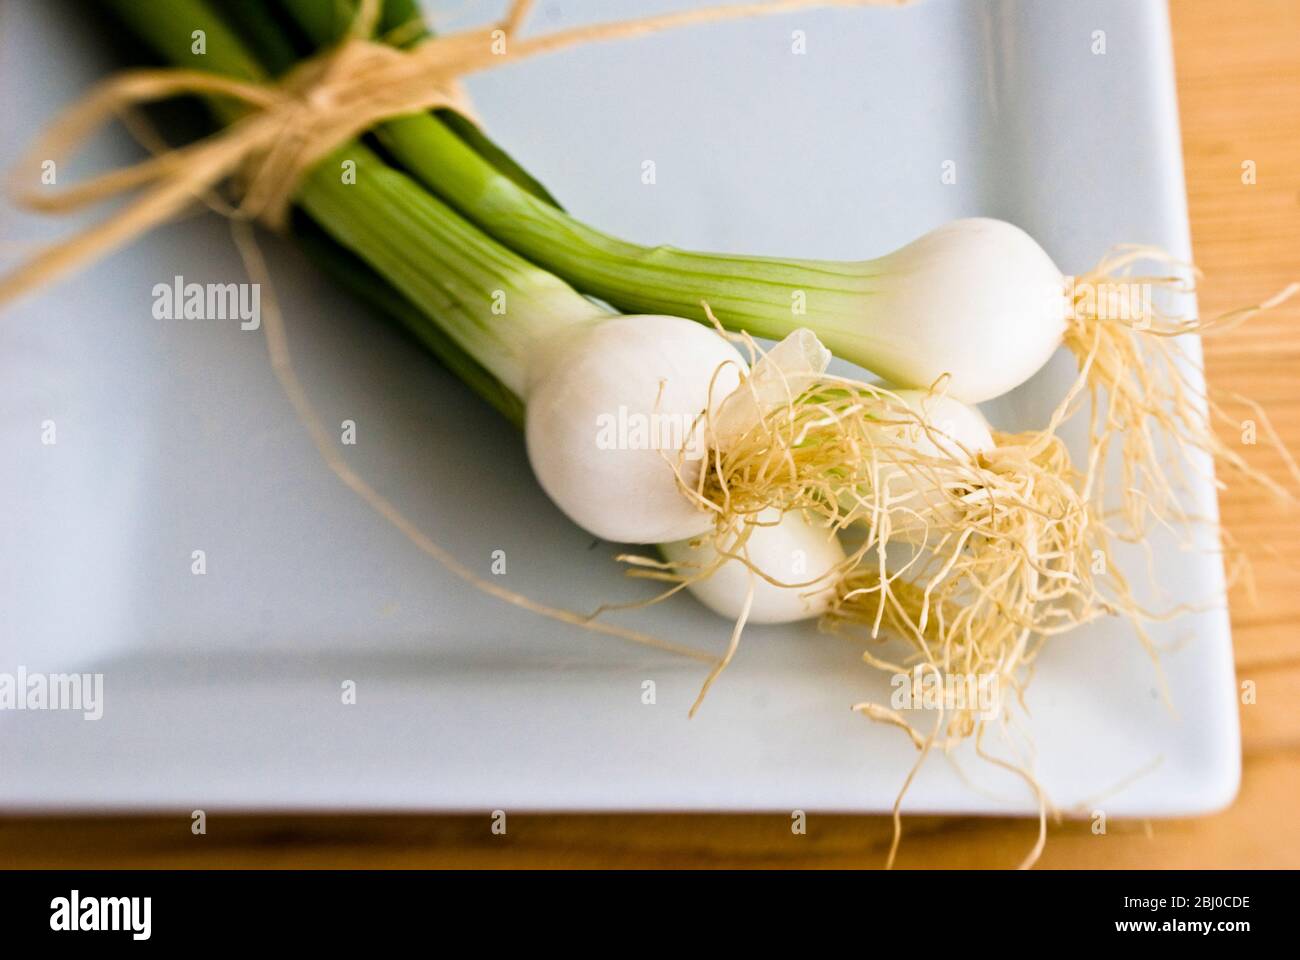 Small bindle of fresh salad onions on white plate - Stock Photo